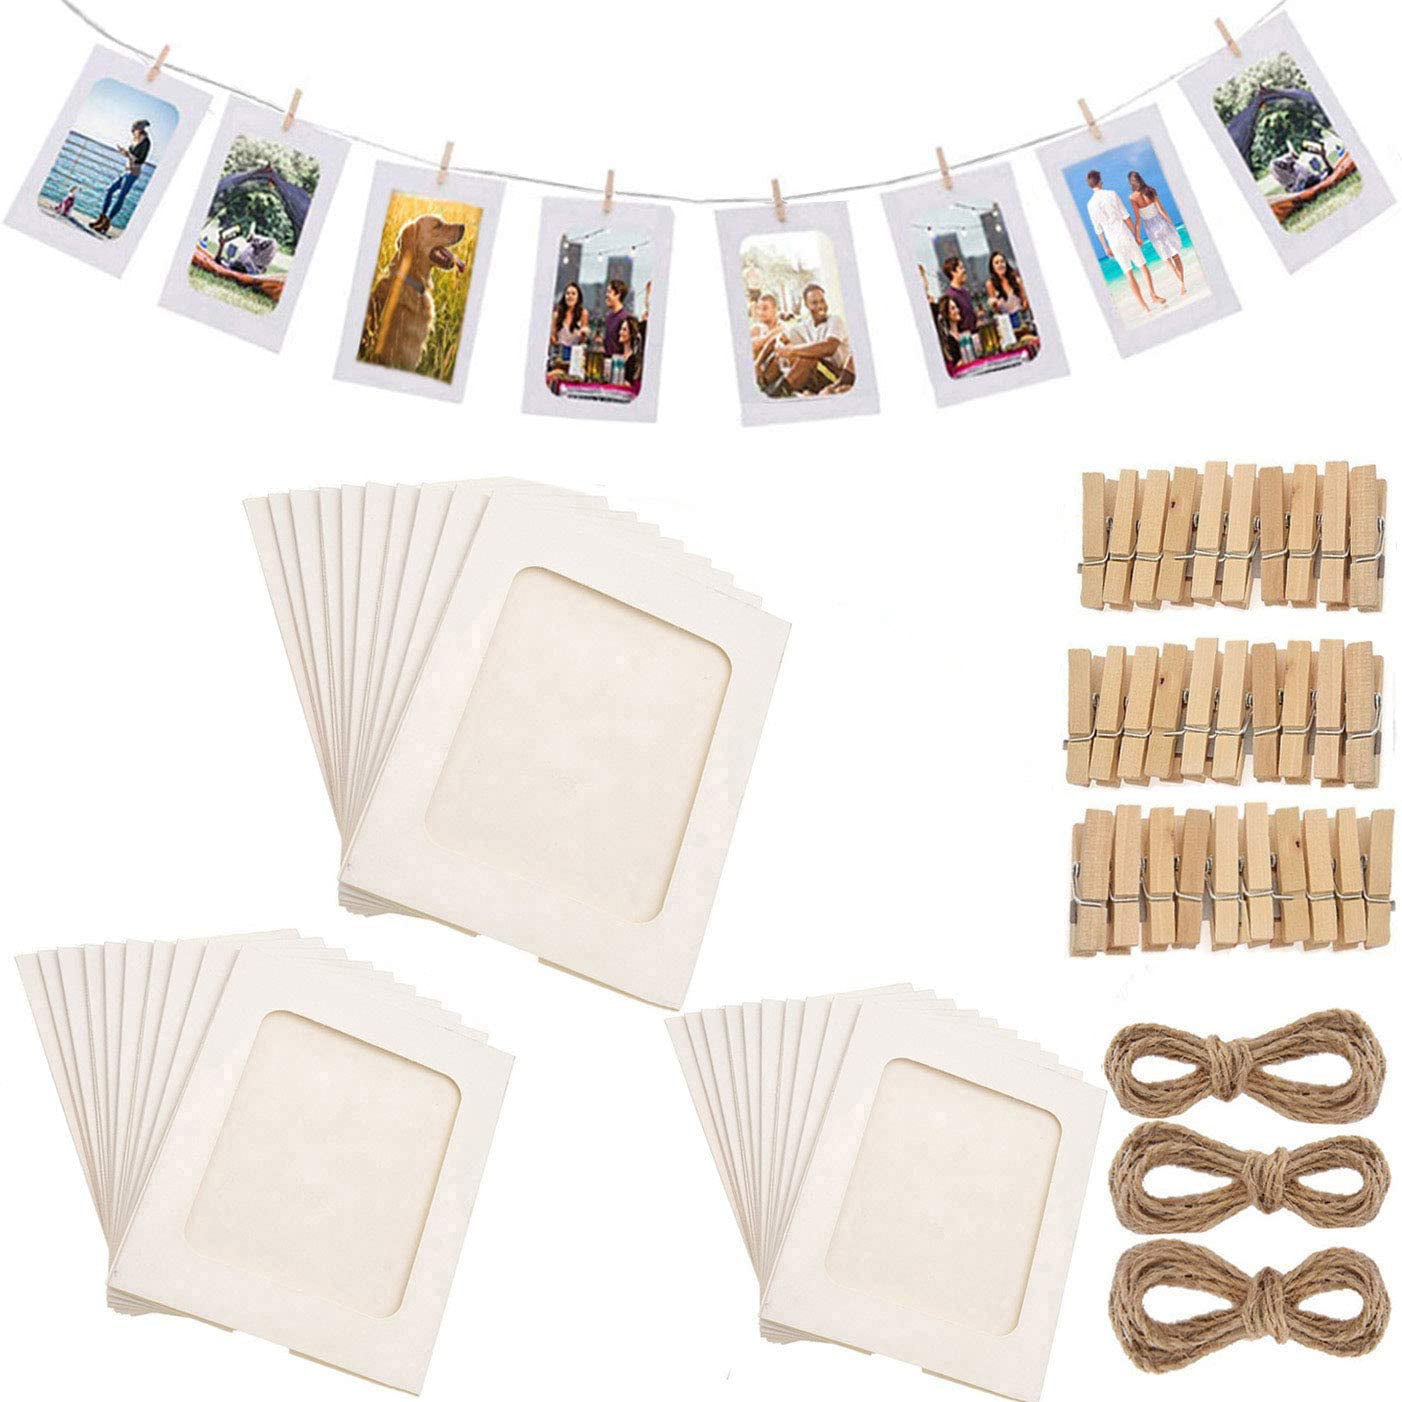 30x Paper 4 x 6 Photo Frame Sleeve Decoration DIY Wall Picture Album Craft Clips 